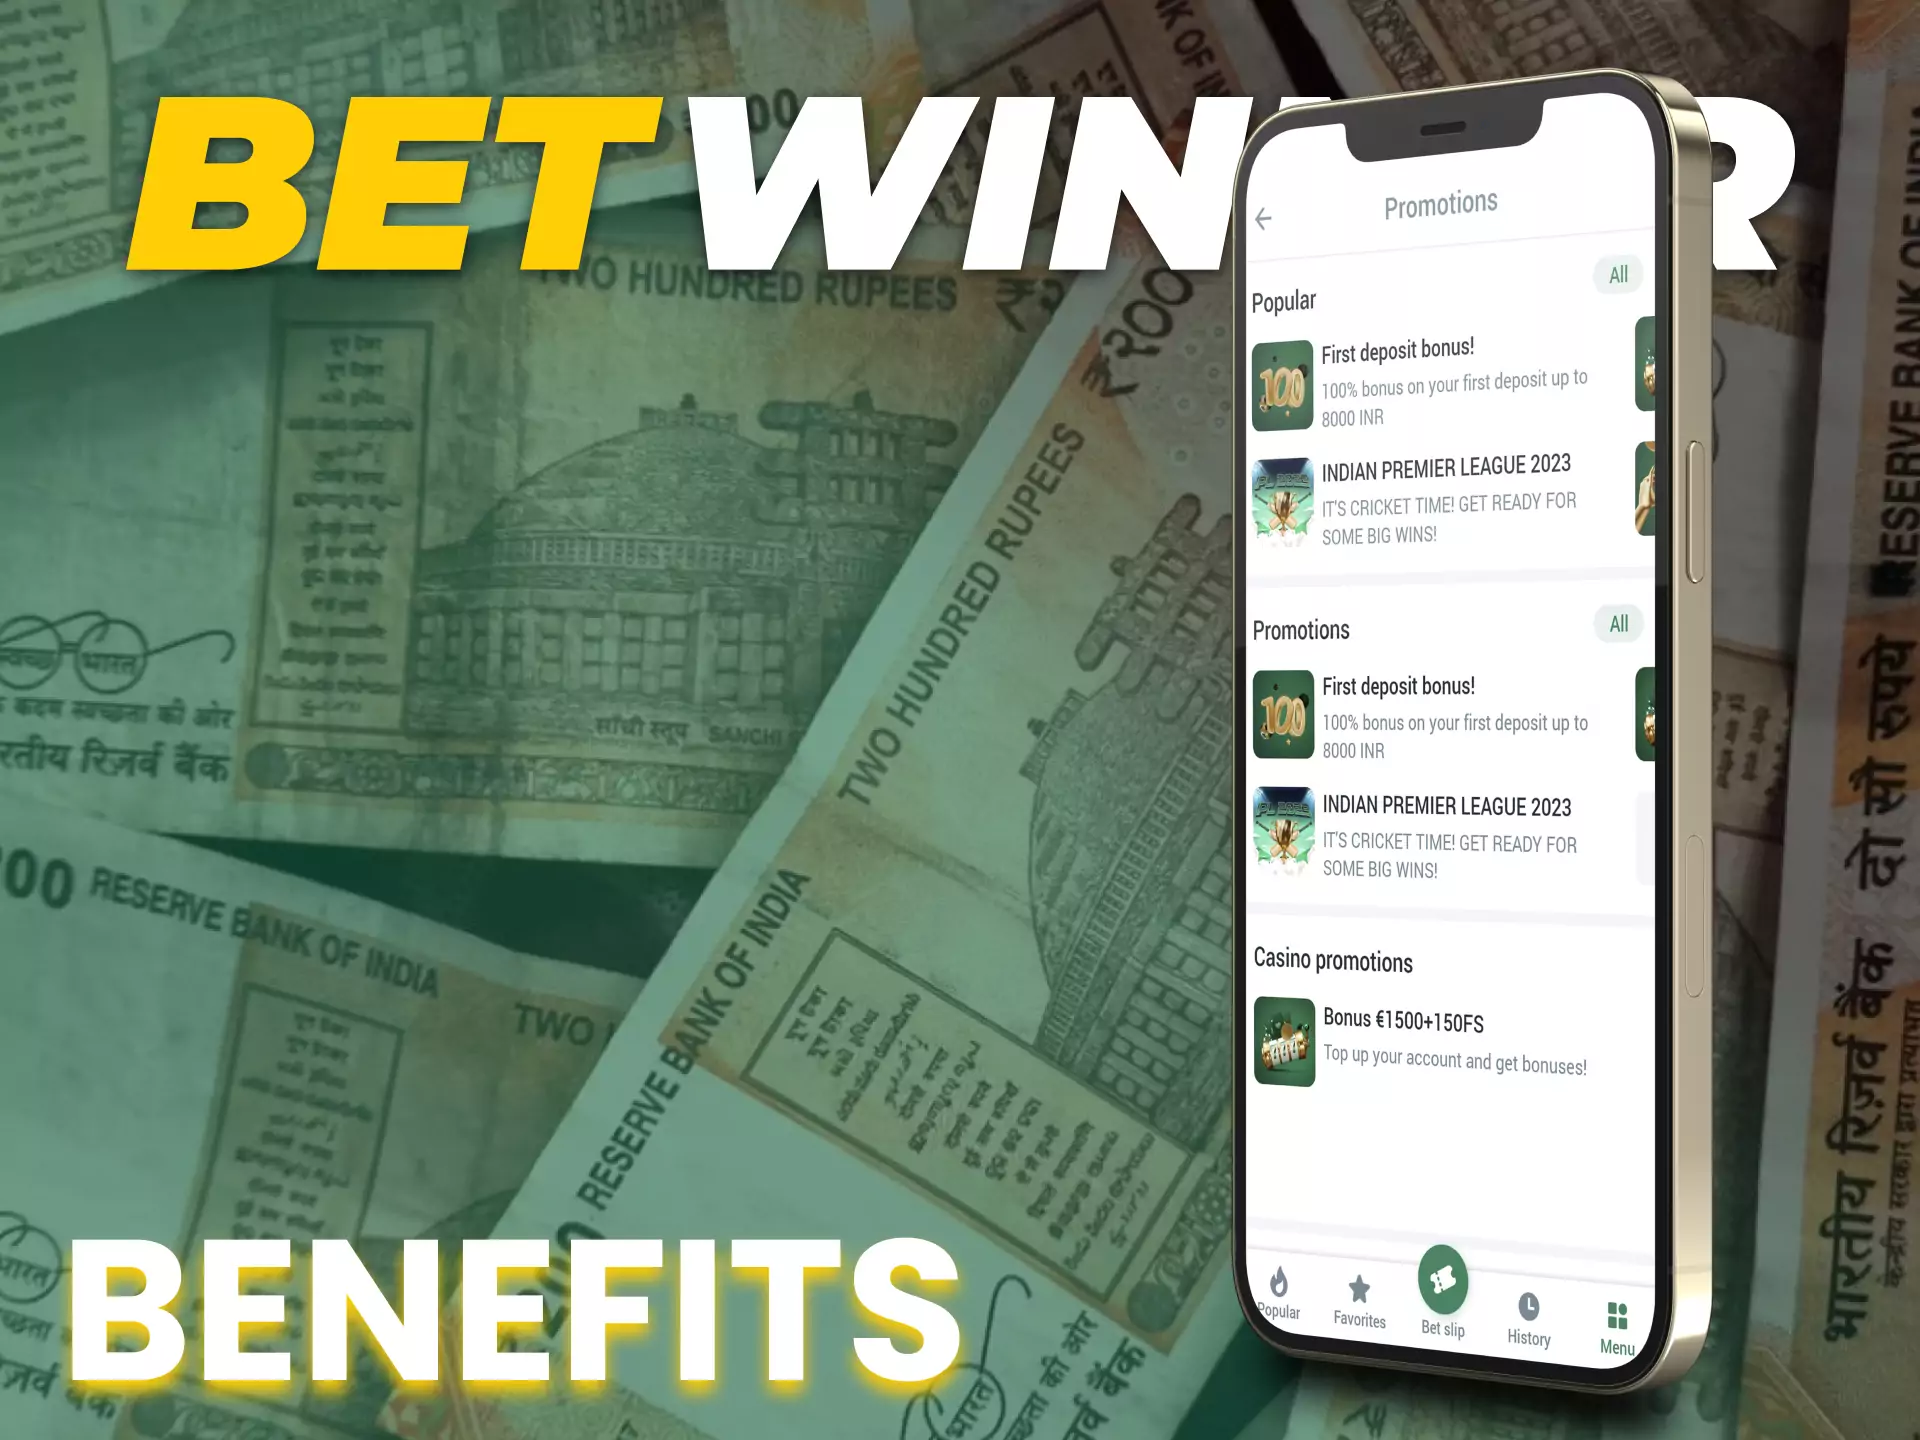 The Betwinner app offers bonuses and benefits to all its users.